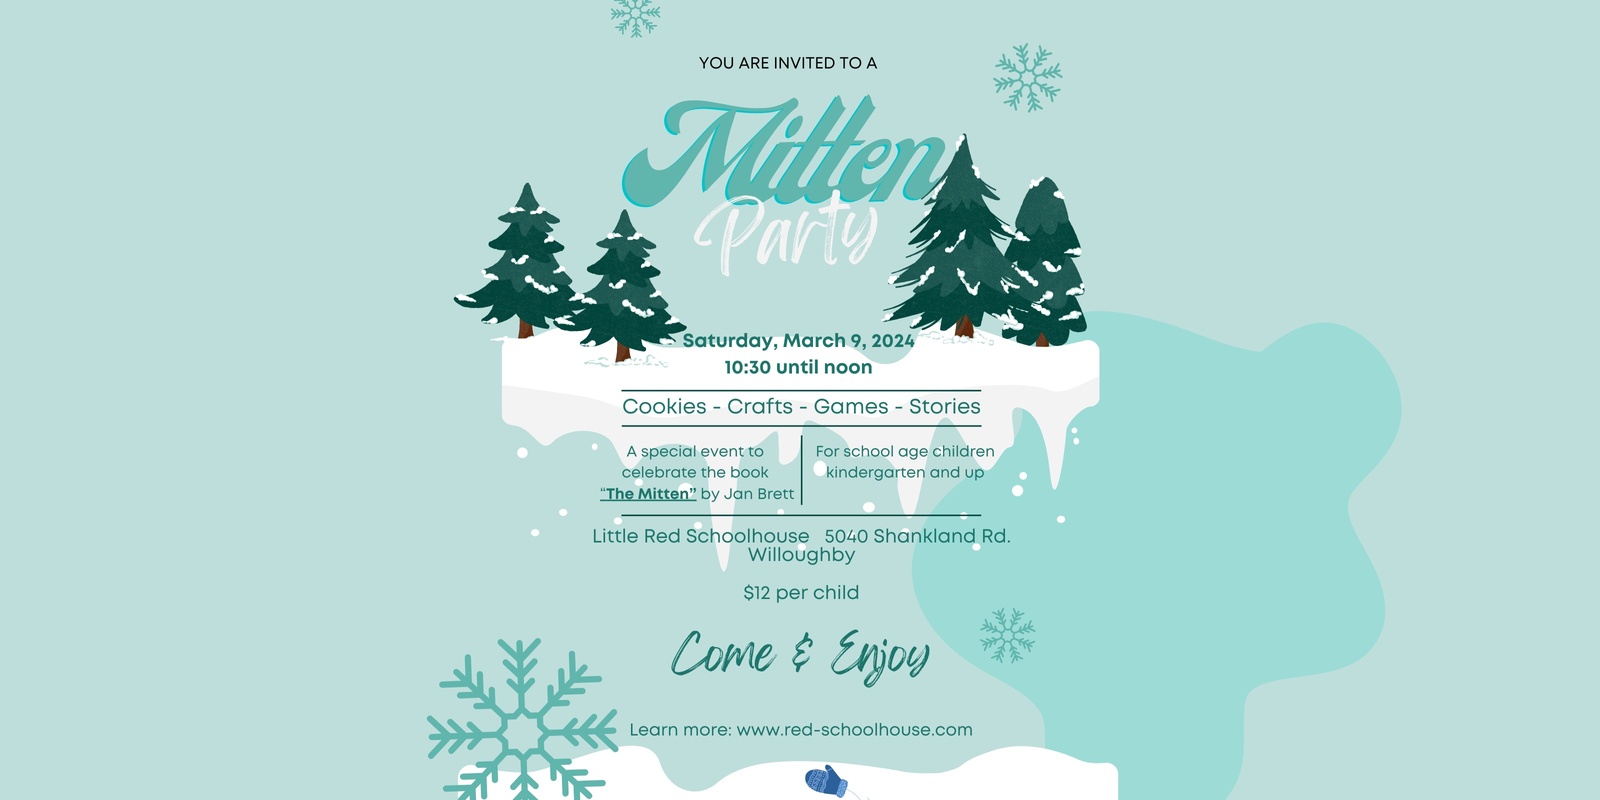 Banner image for You're invited to a MITTEN PARTY! To celebrate the story "The Mitten" by Jan Brett